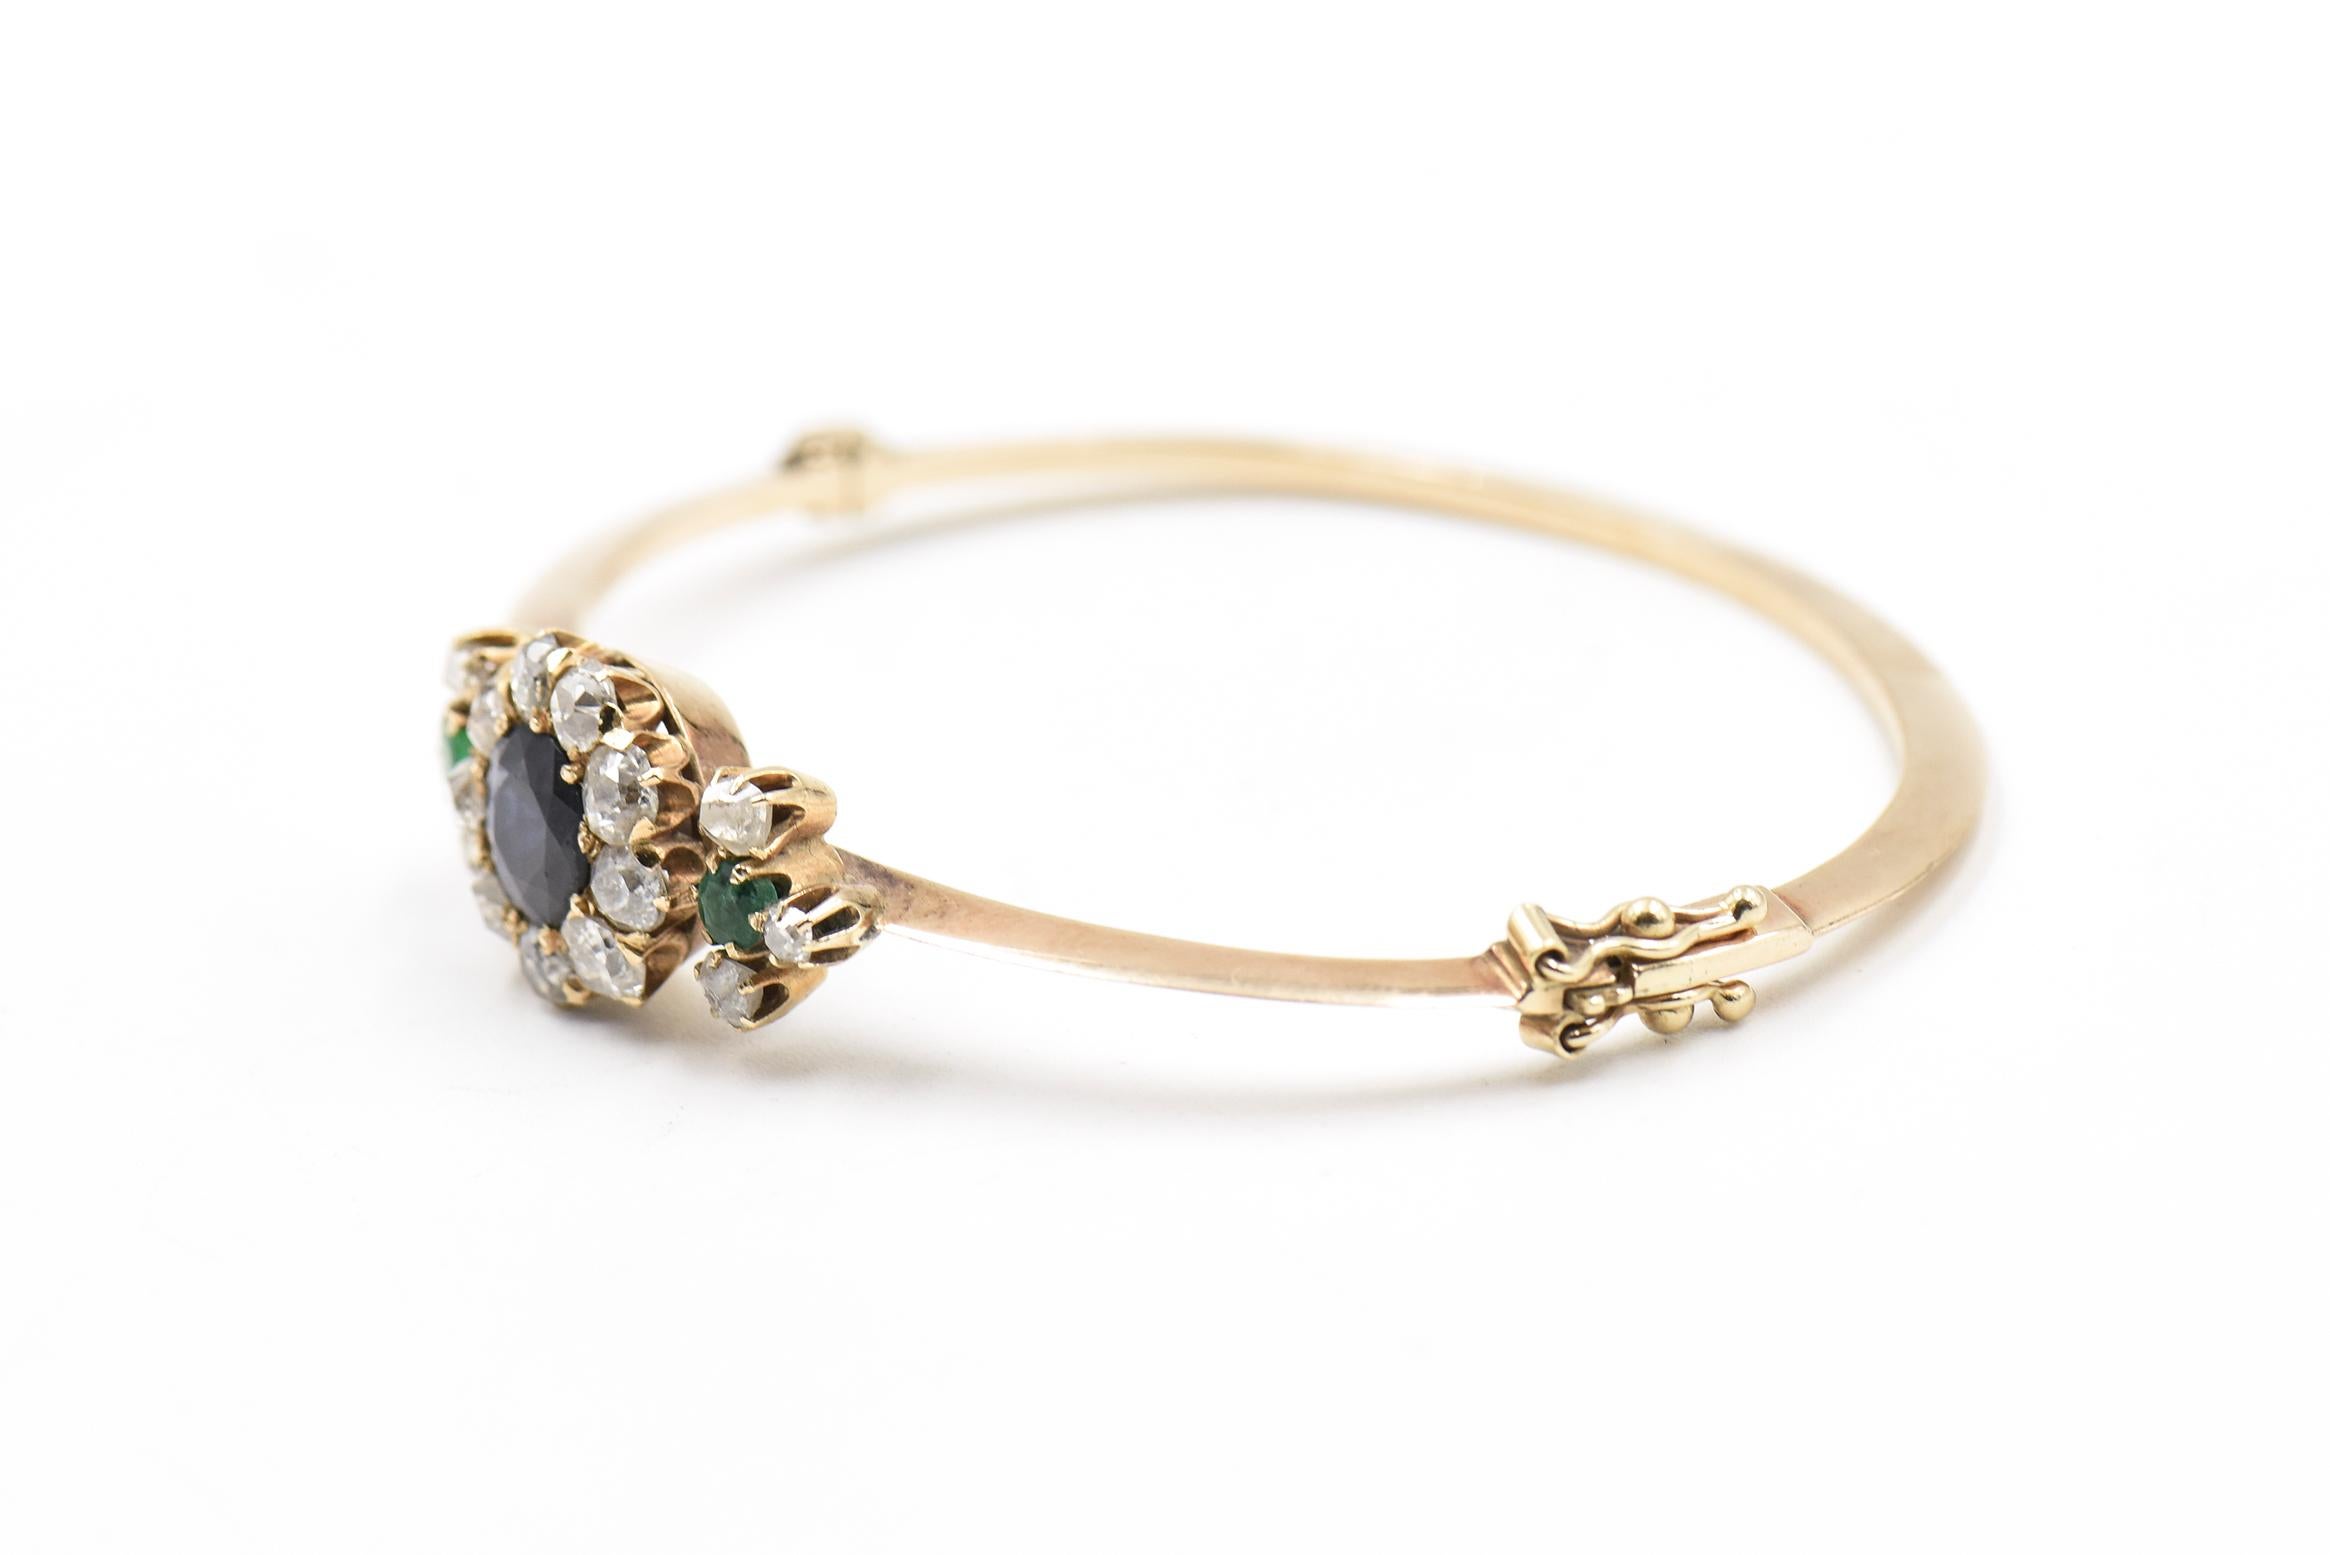 Victorian flower bracelet featuring a faceted sapphire summoned by old mine cut diamonds with emerald and diamond leaf accents on the sides.  The design sits on a knife edge 14k yellow gold bangle bracelet.  The bracelet hinges open and has a figure